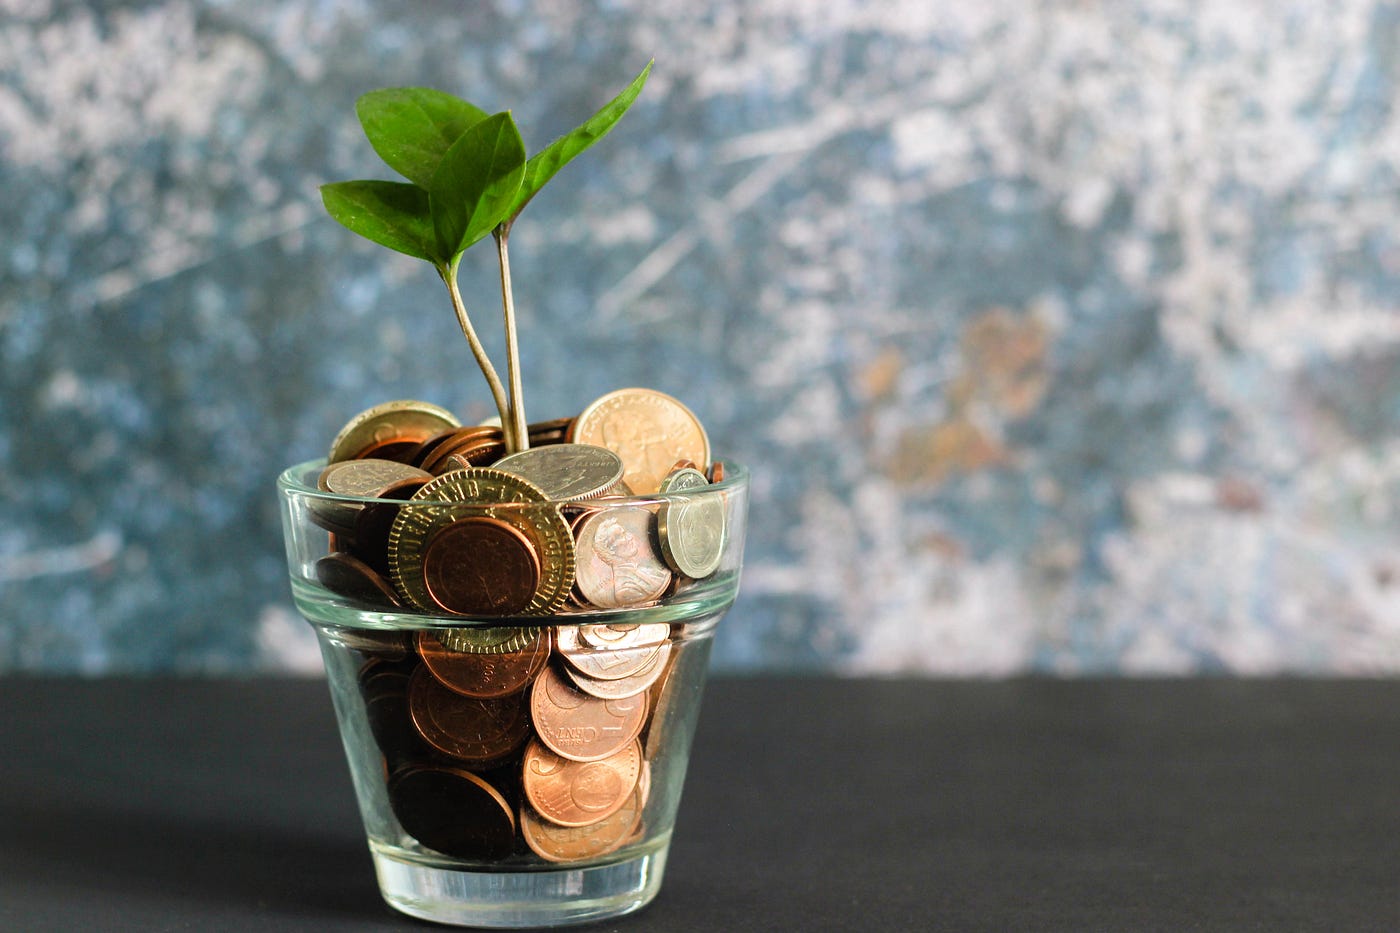 A plant growing from a glass filled with coins.